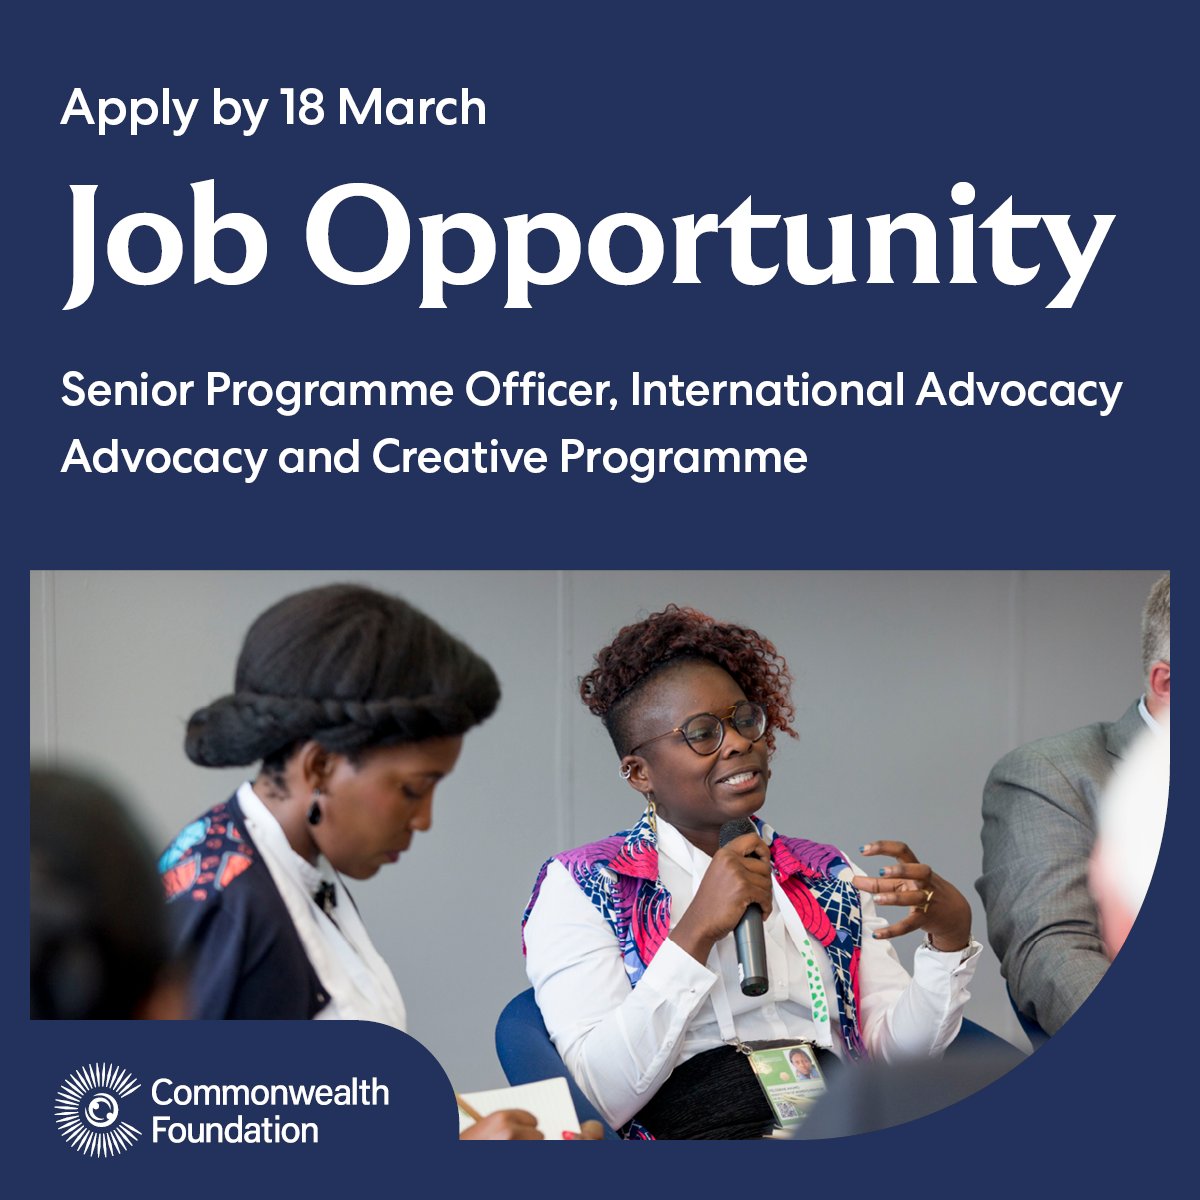 Do you have international advocacy experience with a focus on climate justice, health justice or freedom of expression? Apply to be our new Senior Programme Officer, International Advocacy and design and lead advocacy projects 👇 bit.ly/4bTlmZc